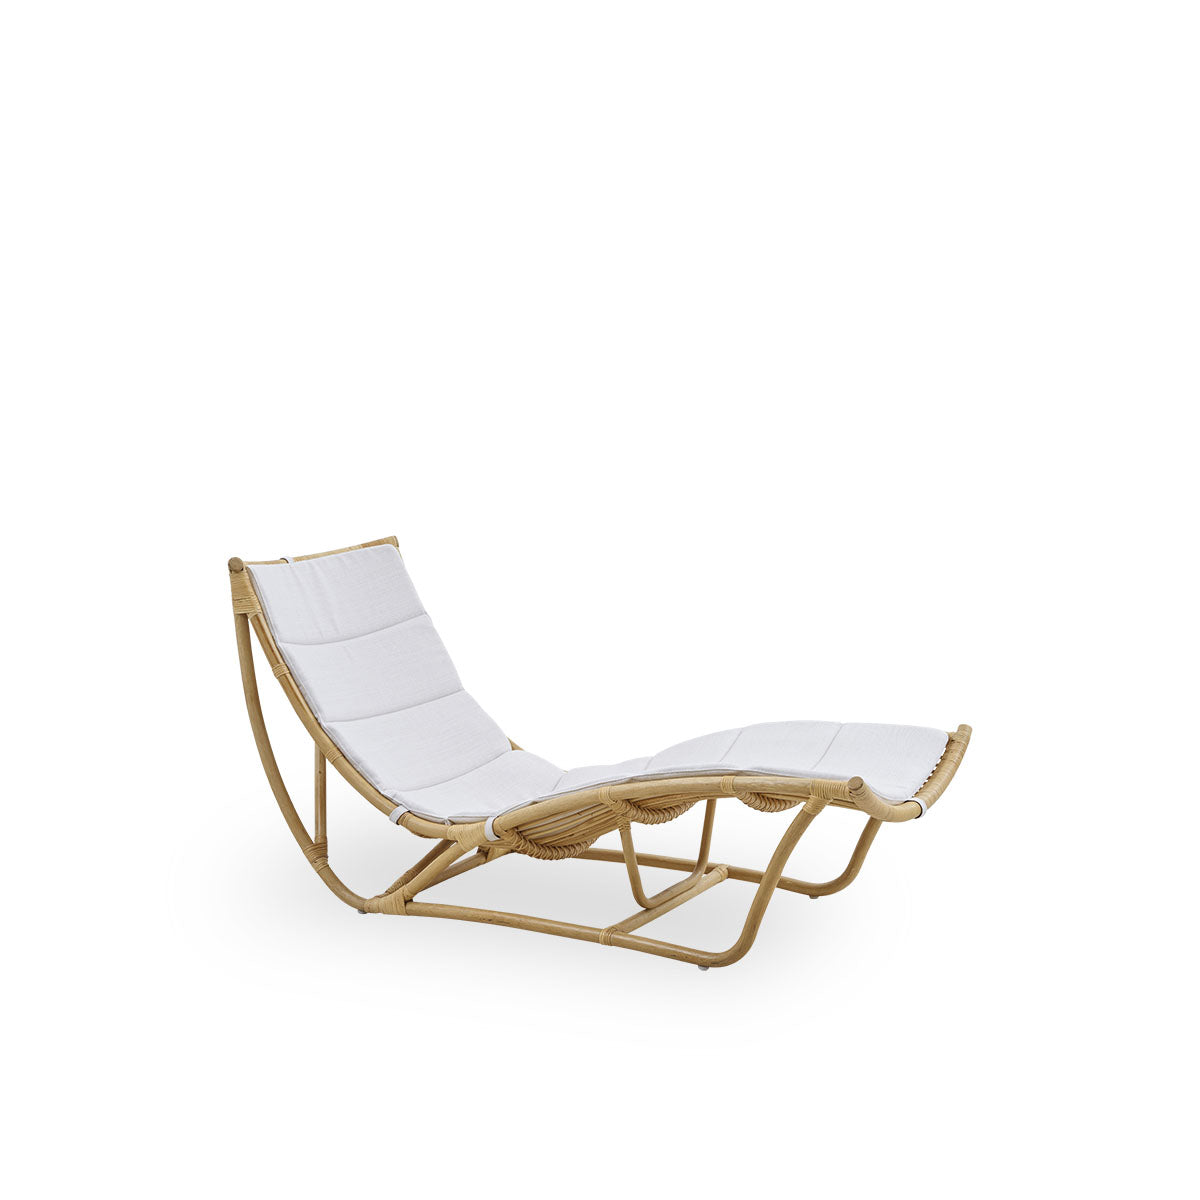 Michelangelo Daybed | Seat & back cushion by Sika